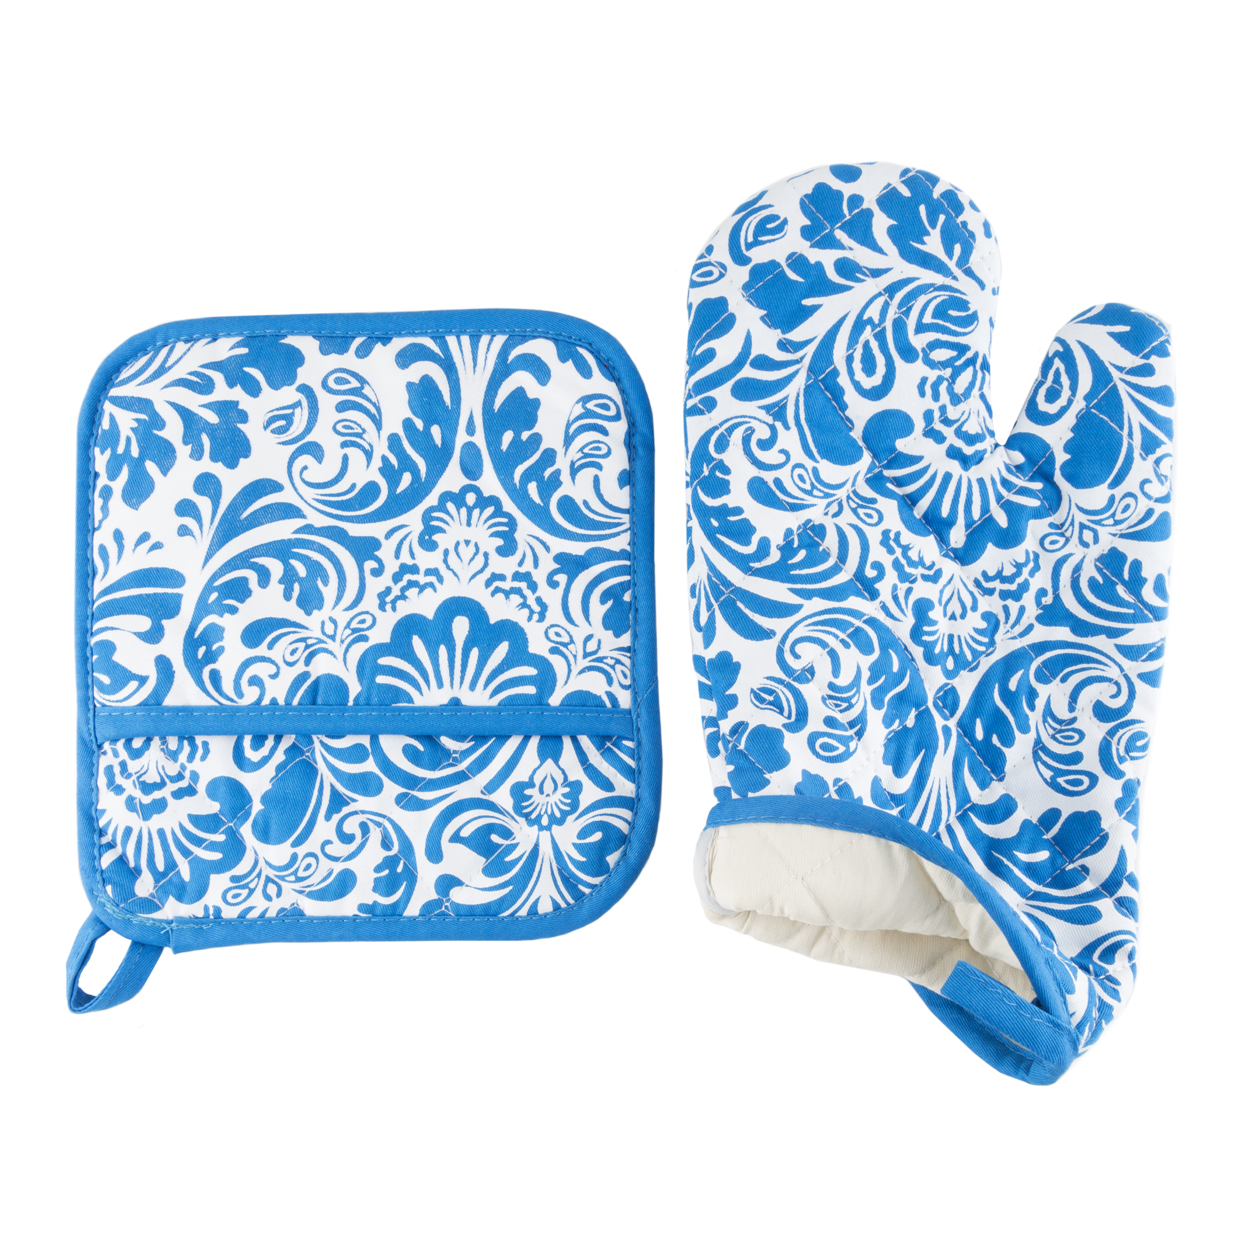 Oven Mitt And Pot Hold Oversized Flame Heat Protection Big Kitchen Safety Blue